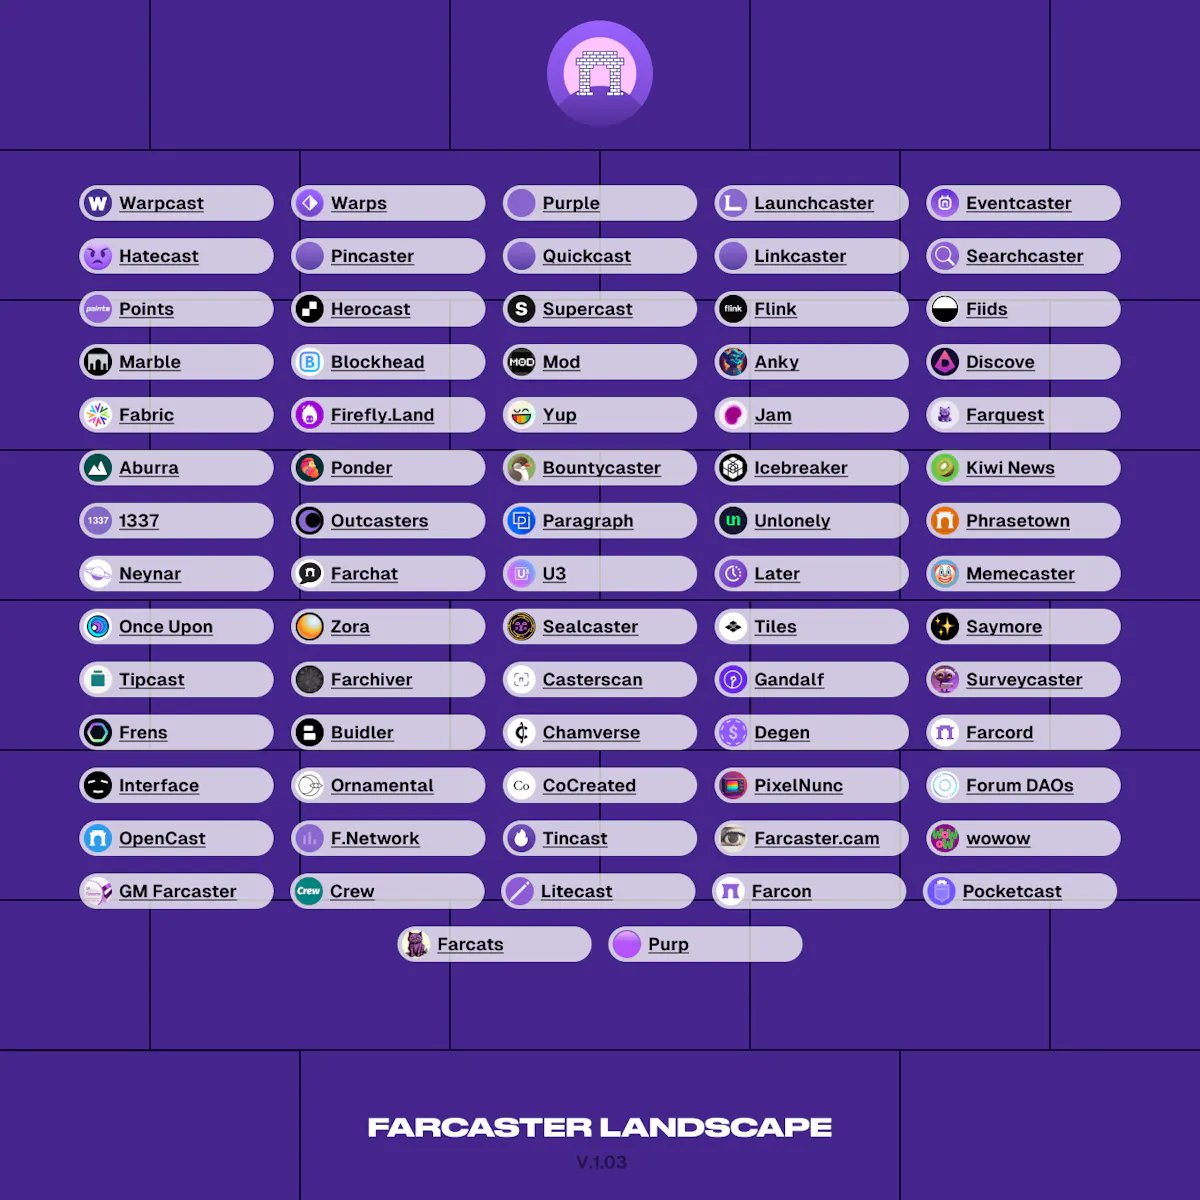 A glimpse at the Farcaster ecosystem.